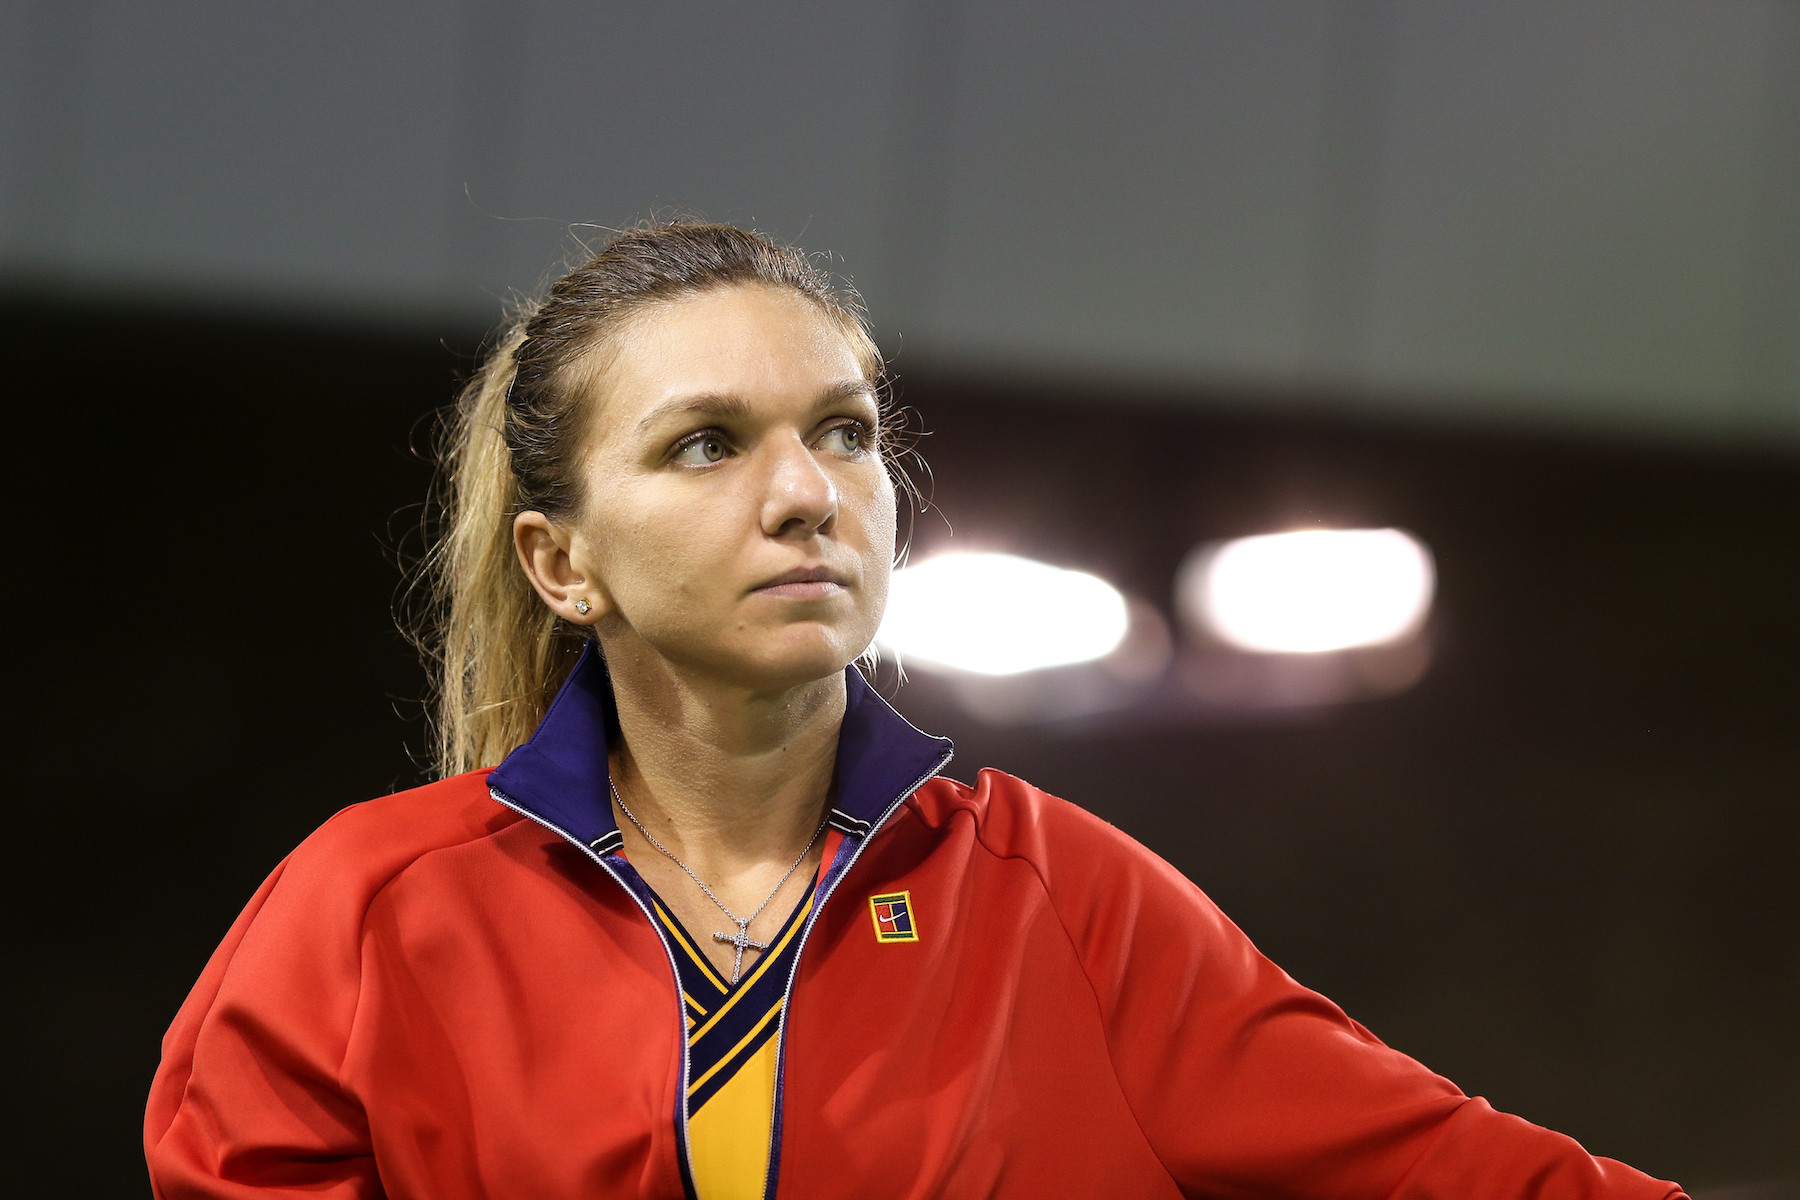 Romanian tennis star Simona Halep sues producer of supplement that she says led to doping charge